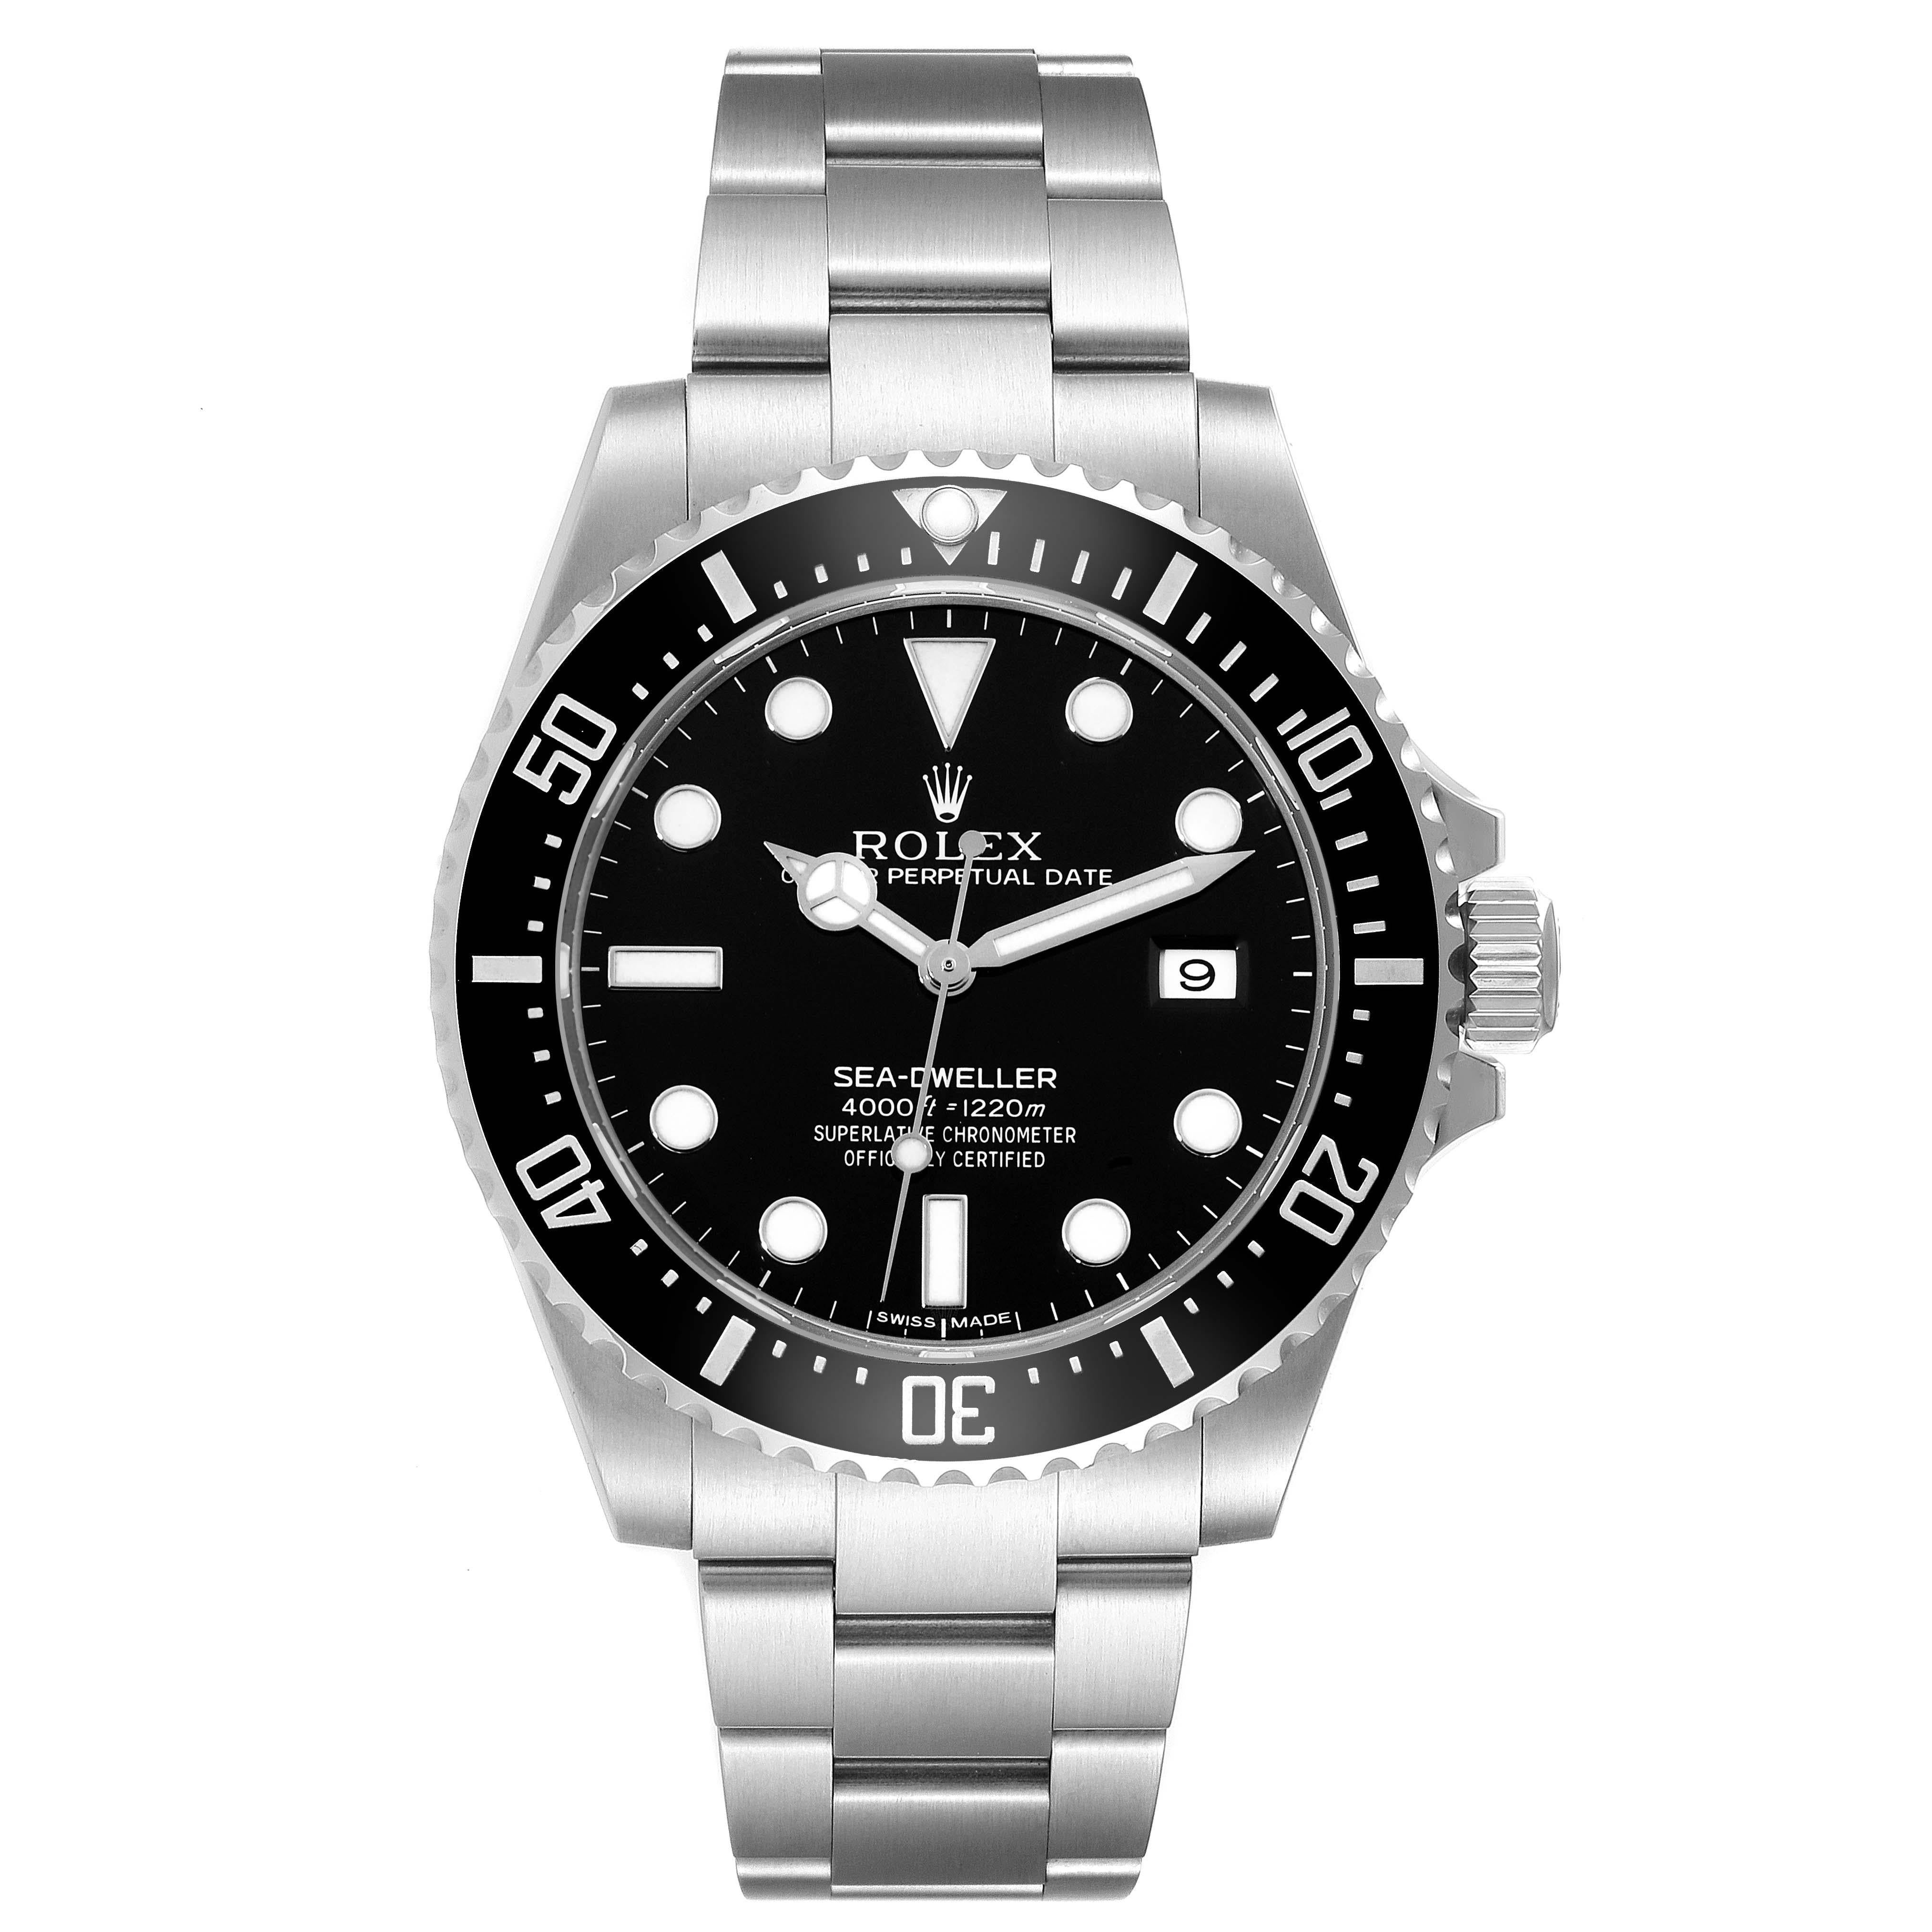 Rolex Seadweller 4000 Automatic Steel Mens Watch 116600 In Excellent Condition For Sale In Atlanta, GA